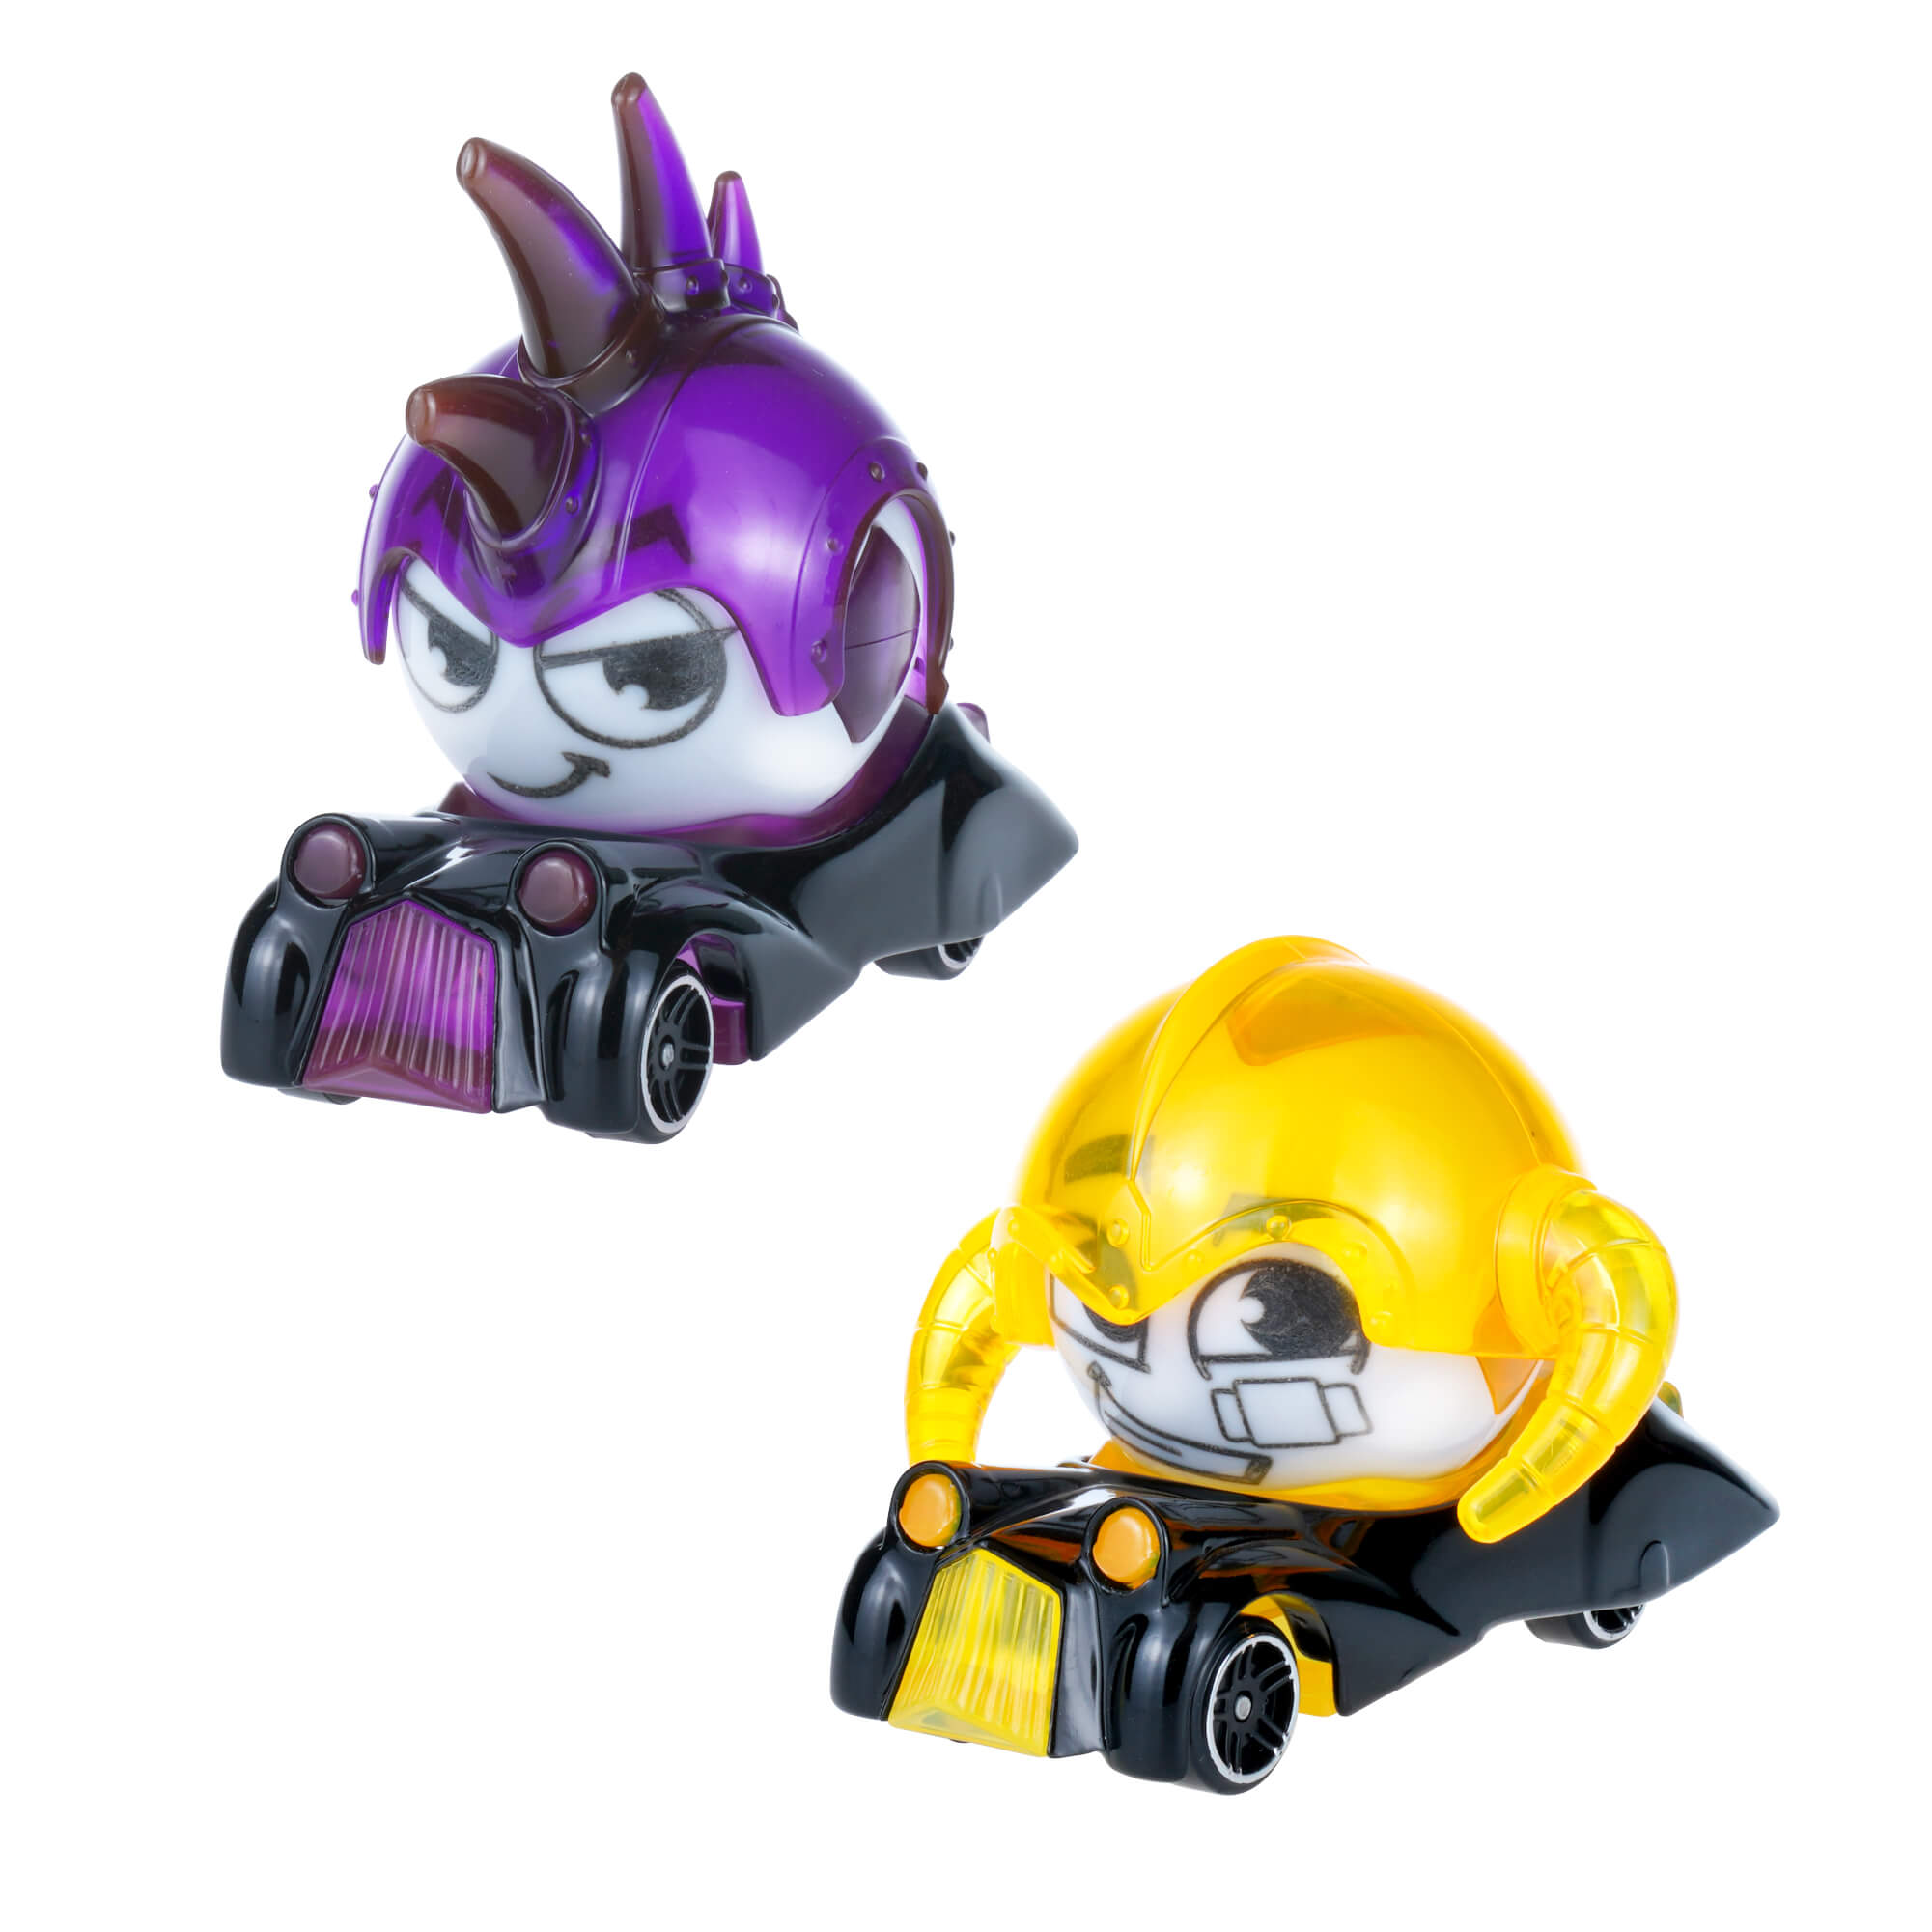 Two Erggs characters in their cars wearing helmets